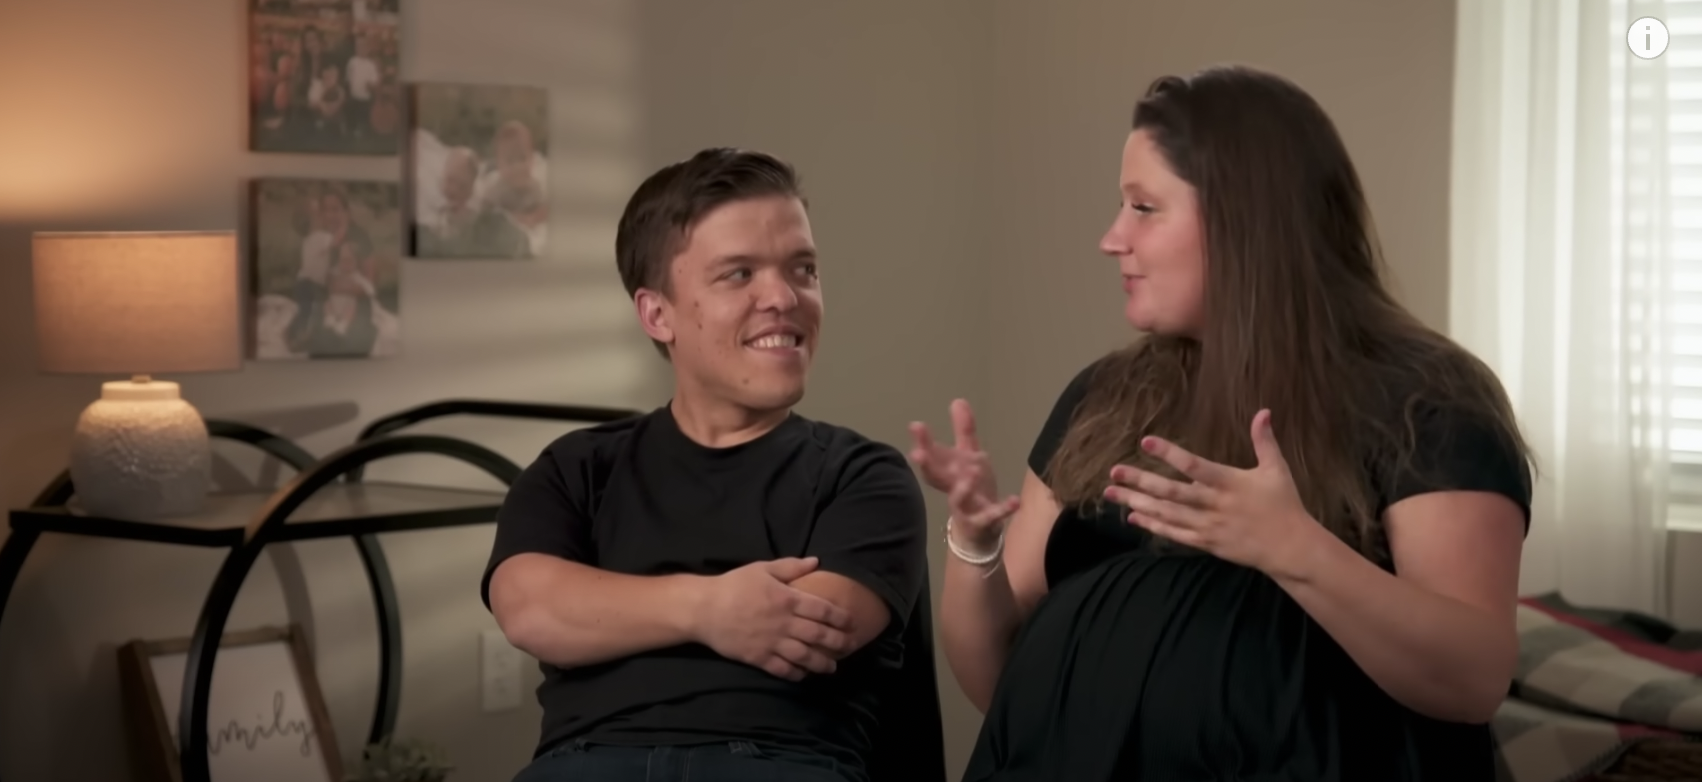  ‘Little People, Big World’: Zach Roloff Says People Think It’s ‘Not Good’ for Him to Have Kids 